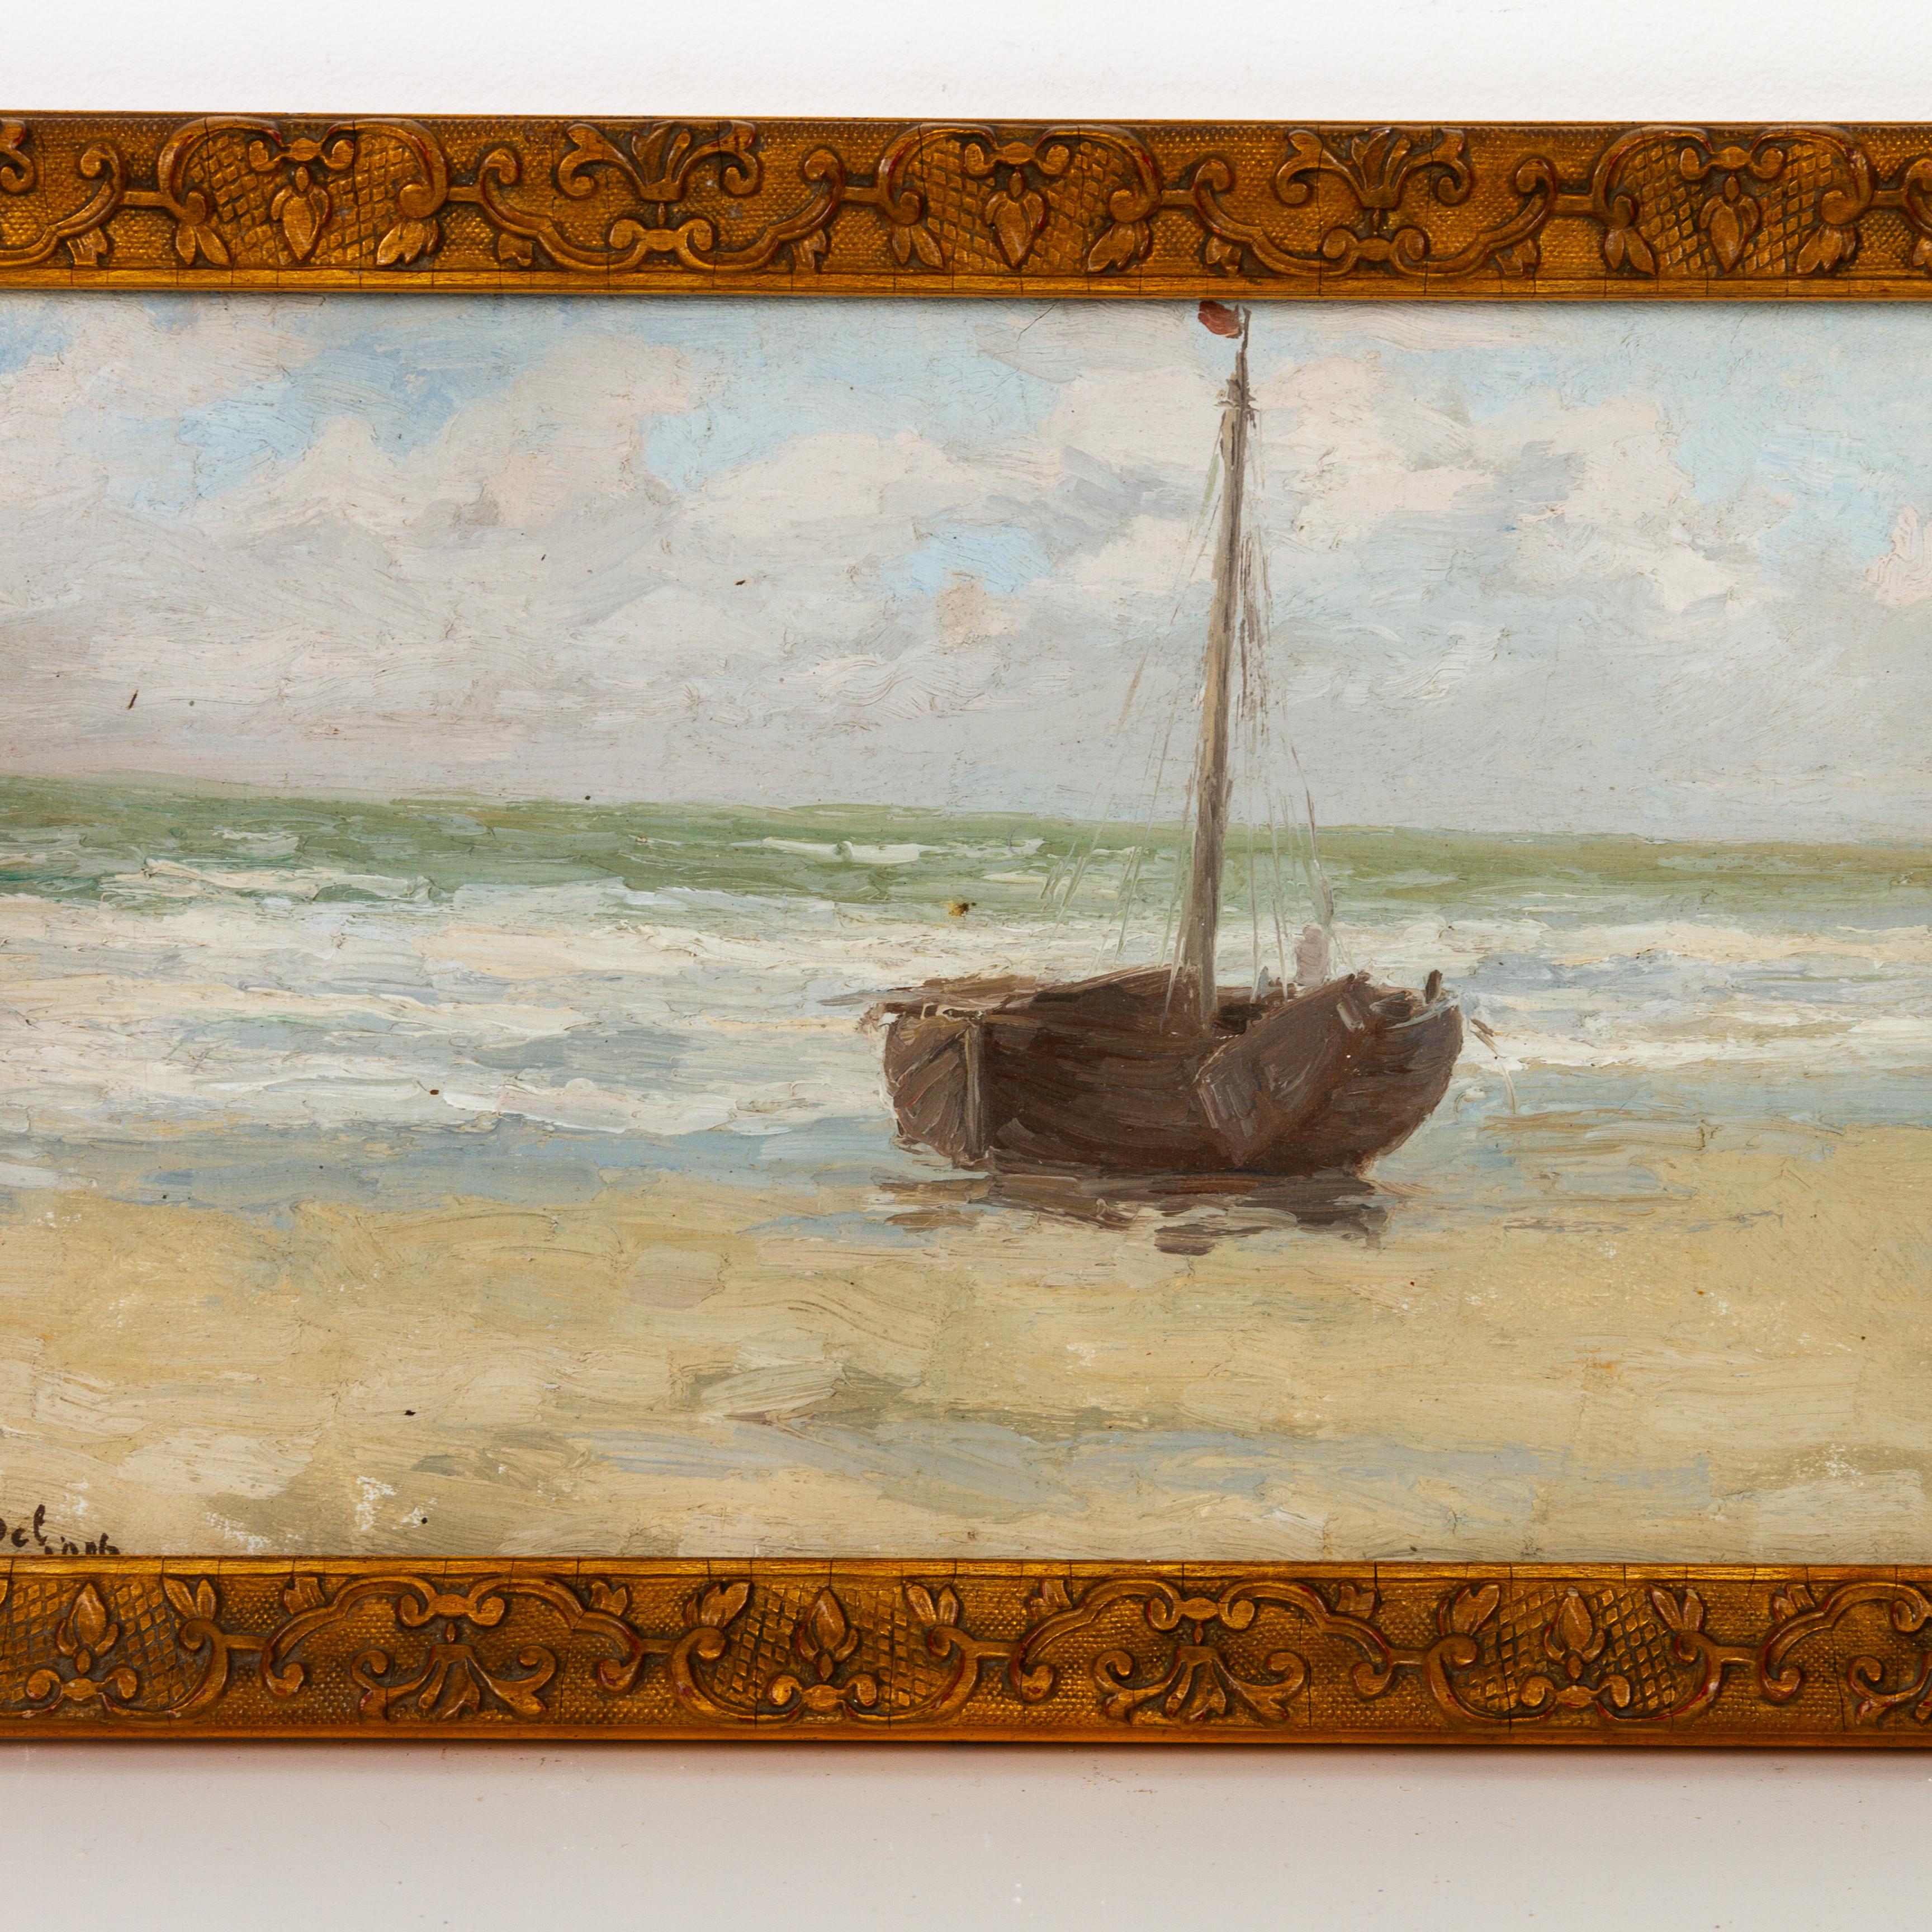 In good condition
From a private collection
Free international shipping
Signed Belgian Nautical Maritime Coastal Landscape Oil Painting
